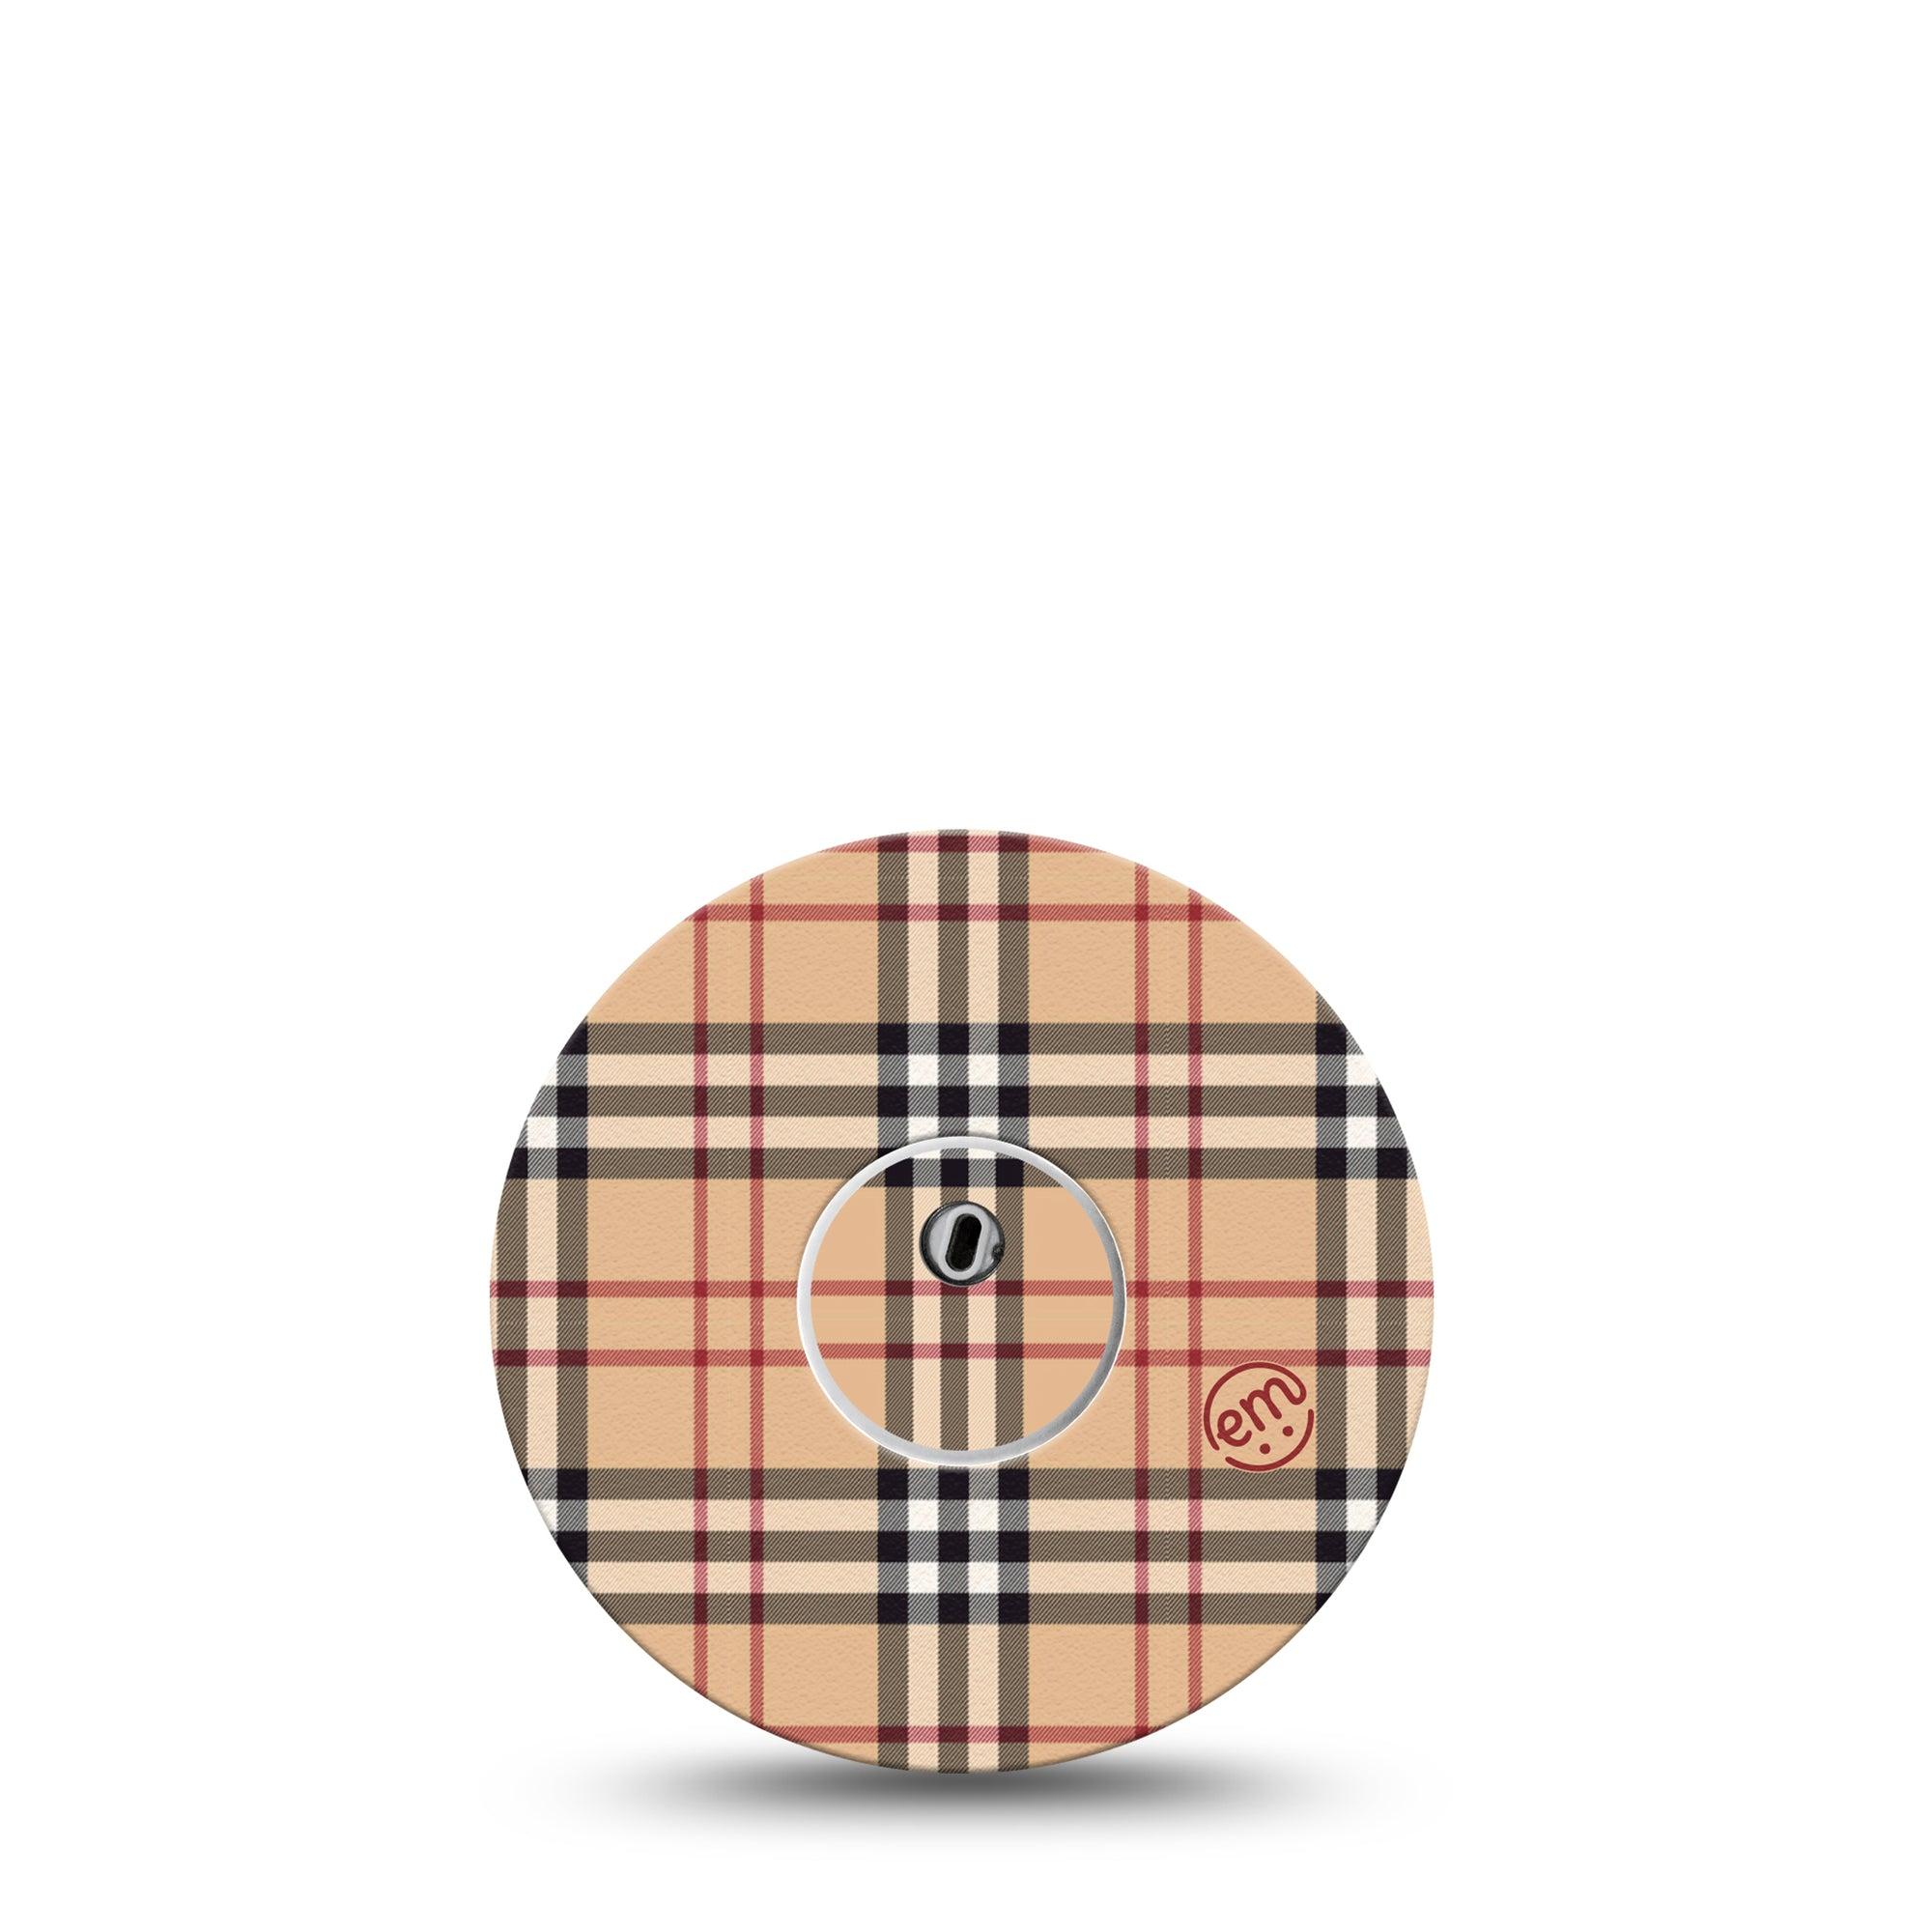 ExpressionMed Libre 3 Transmitter Sticker Classy Stripes Pattern, Brownish Checkered Themed Design, Tape and Sticker